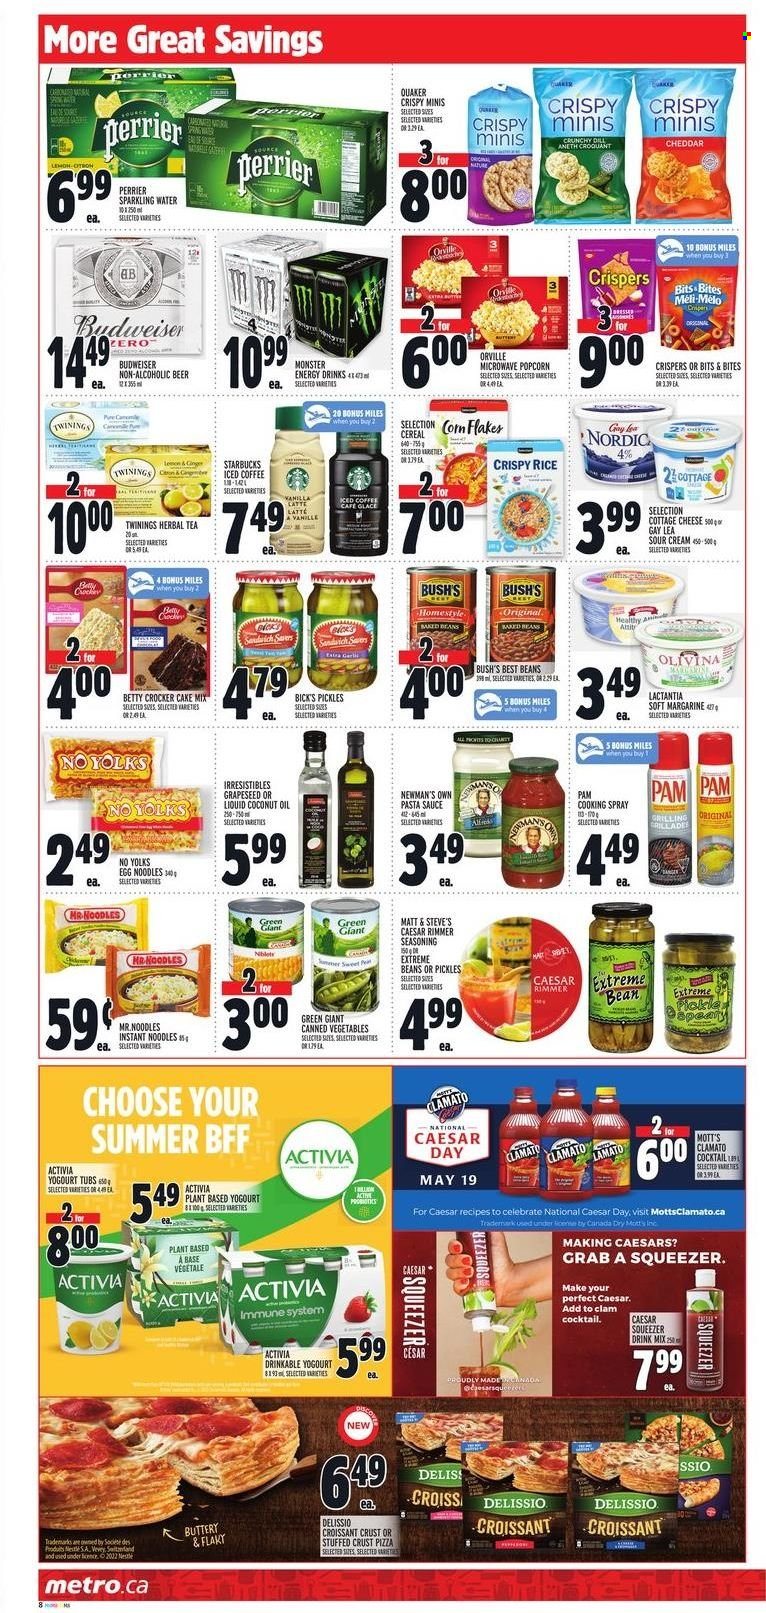 thumbnail - Metro Flyer - May 19, 2022 - May 25, 2022 - Sales products - croissant, cake mix, Mott's, clams, pizza, pasta sauce, sandwich, instant noodles, sauce, Quaker, noodles, cottage cheese, cheddar, Activia, margarine, sour cream, popcorn, pickles, canned vegetables, cereals, corn flakes, egg noodles, dill, spice, coconut oil, cooking spray, oil, energy drink, Monster, Clamato, Monster Energy, Perrier, sparkling water, iced coffee, tea, herbal tea, Twinings, Starbucks, beer, squeezer, Budweiser. Page 9.